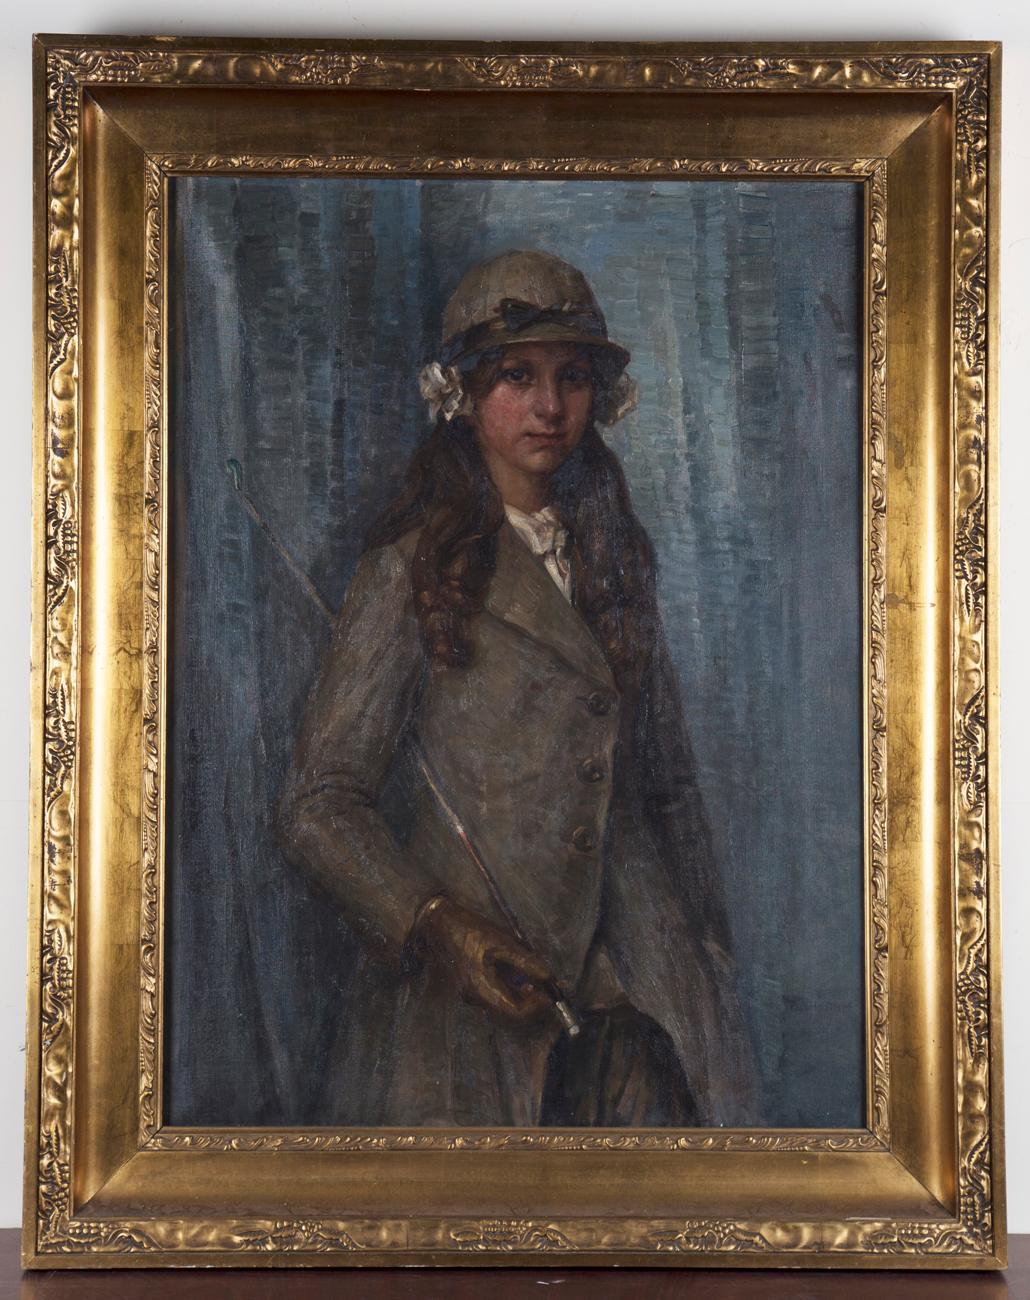 Portrait of a young girl in riding attire - Painting by Bertha Dorph